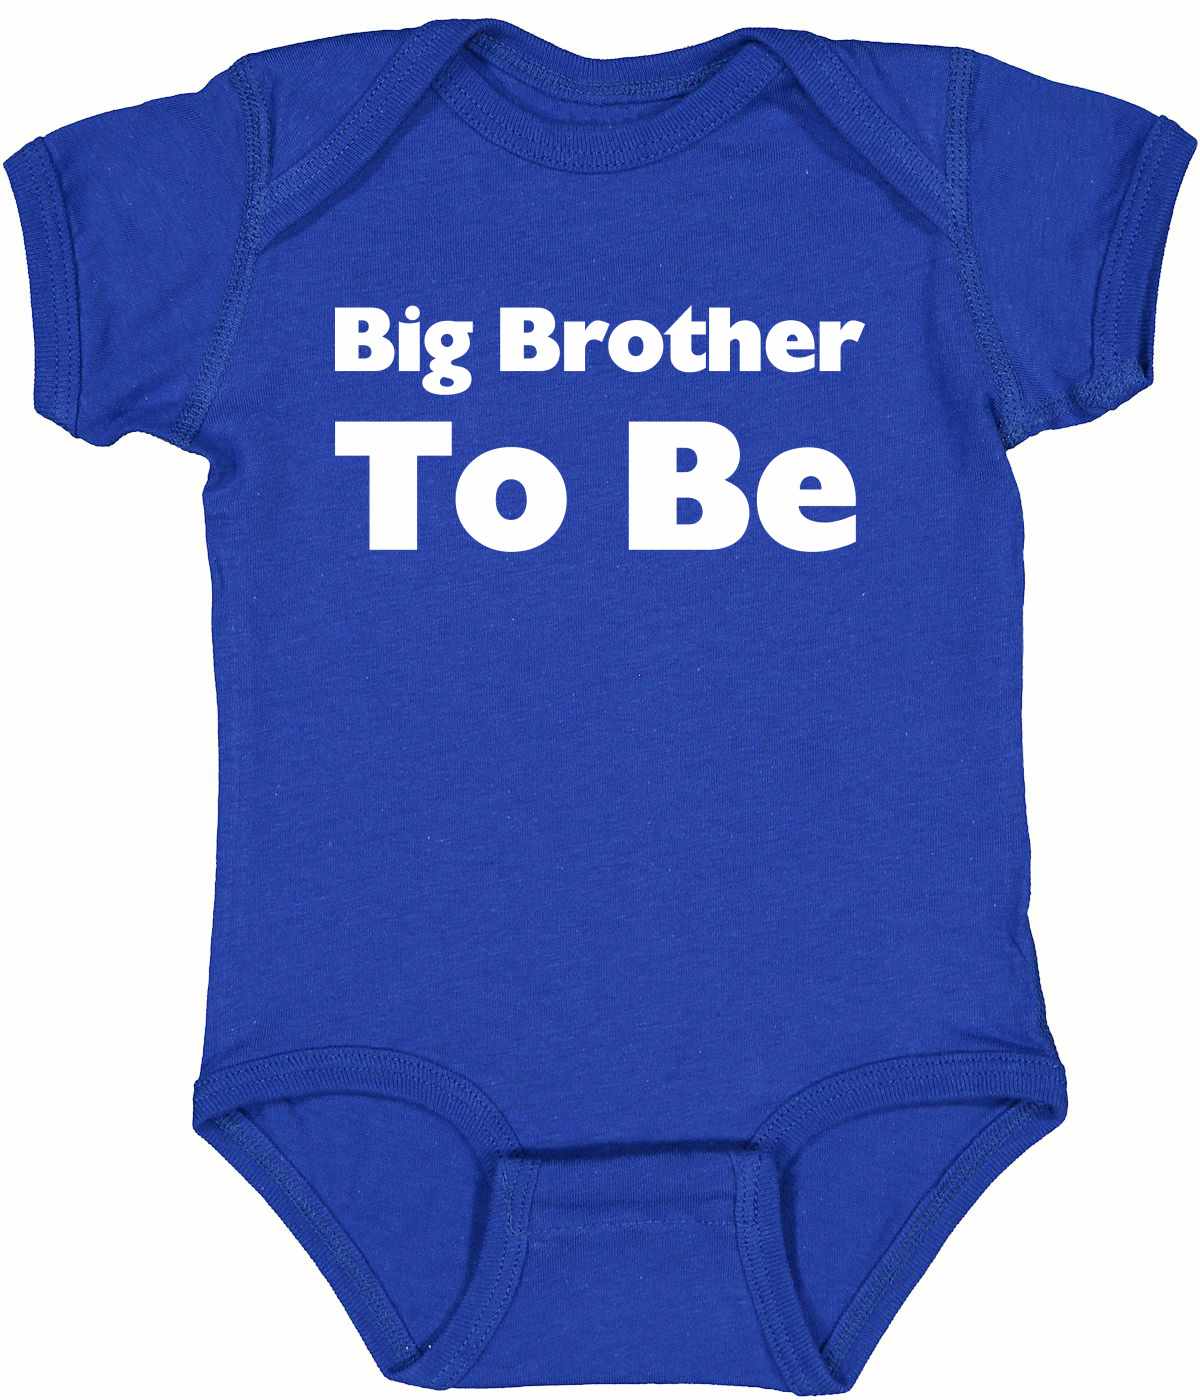 Big Brother To Be on Infant BodySuit (#863-10)